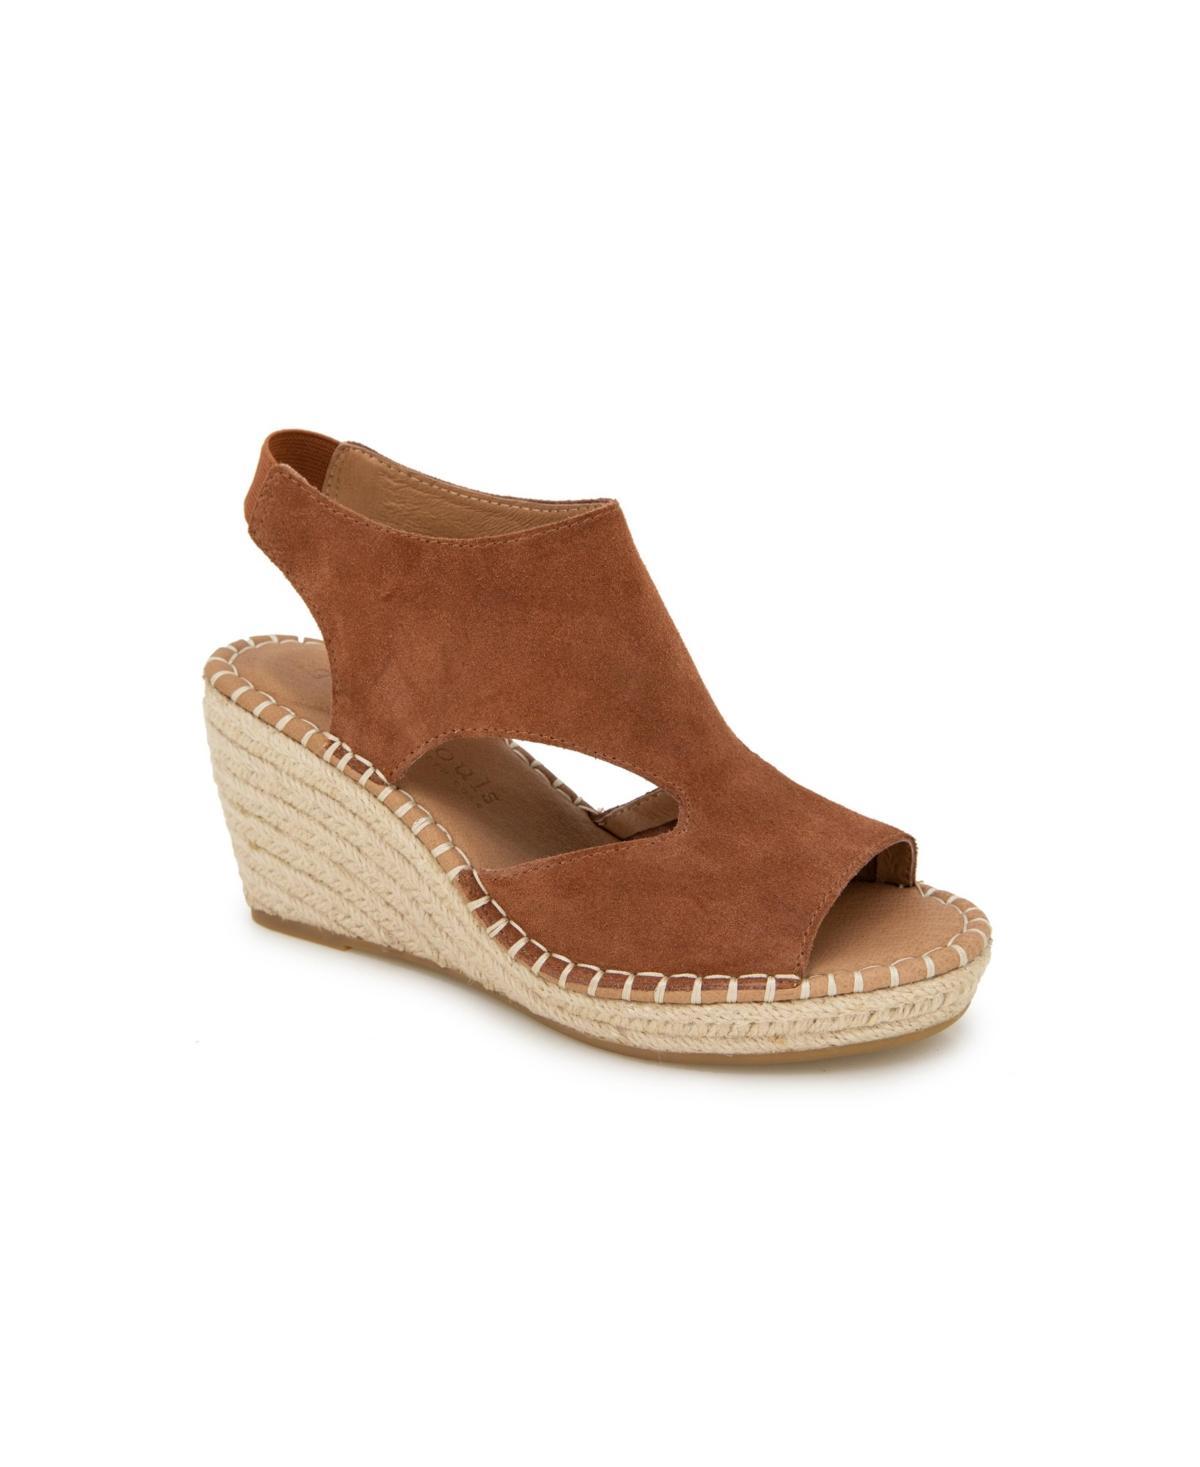 GENTLE SOULS BY KENNETH COLE Cody Espadrille Wedge Sandal Product Image